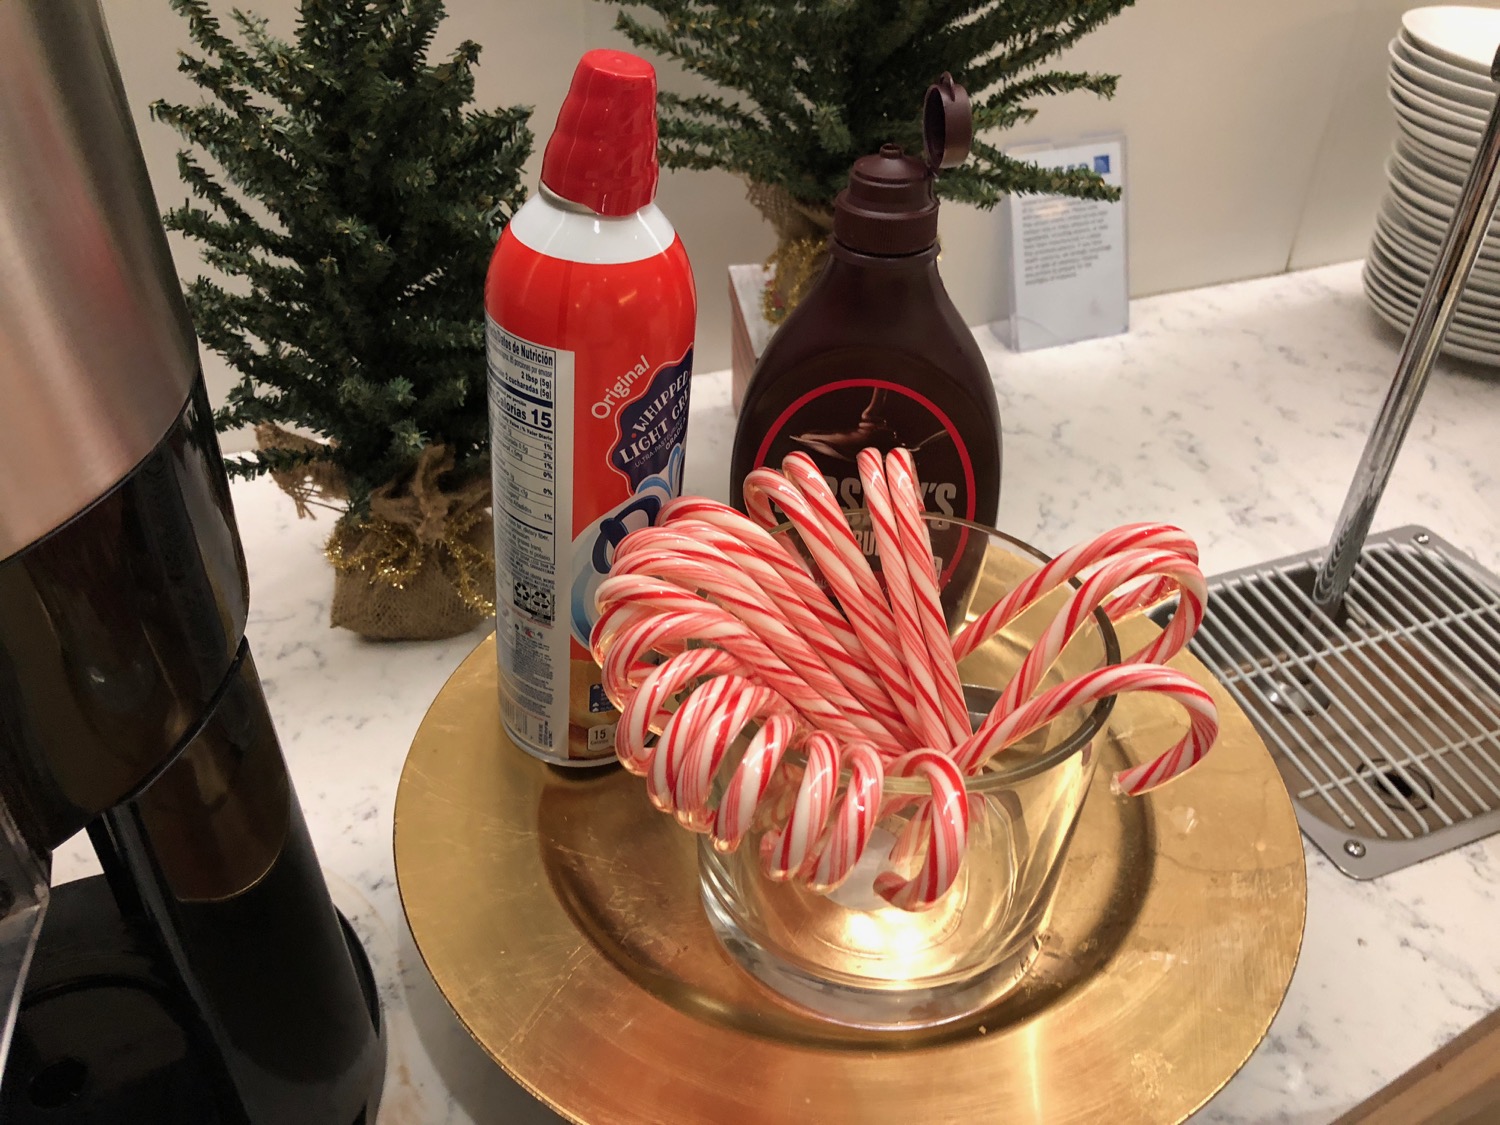 a glass with candy canes on a gold plate with a bottle of cleaner